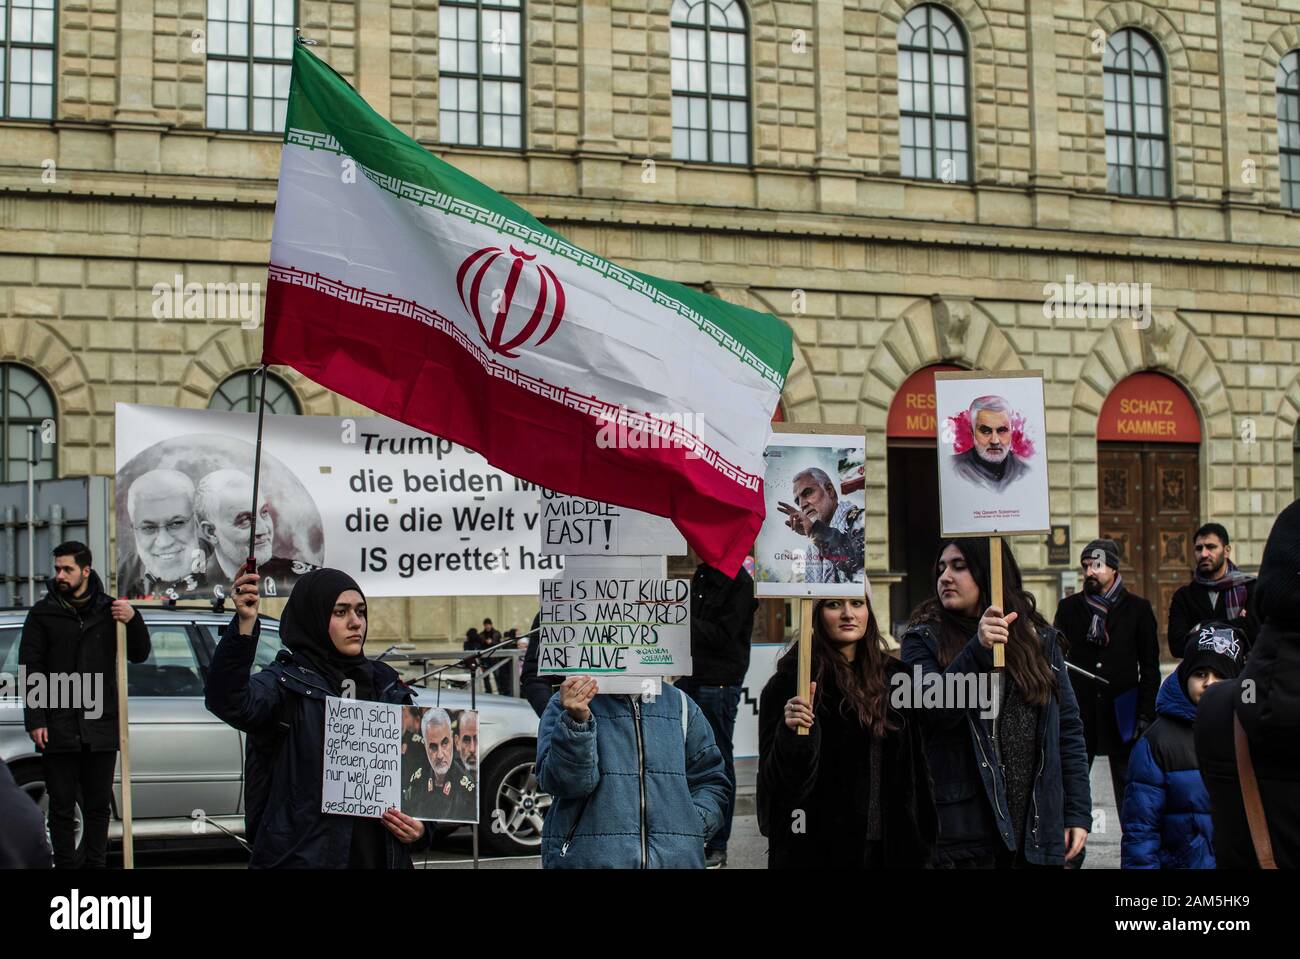 Munich, Bavaria, Germany. 11th Jan, 2020. Demonstrators in Munich, Germany against the Trump-ordered killing of General Qasem Soleimani wave the Iranian flag and demand the exit of US troops from the middle east. Approximately 70 participants from the Iranian community of Munich, Germany demonstrated against the Trump-ordered missile strike in Iraq that resulted in the death of Iranian general Qasem Soleimani and Mahdi al Muhandis.While the group assigned blame to the United States for the killing, large portions of the speeches were directed against Israel and allies of the United States. Cre Stock Photo